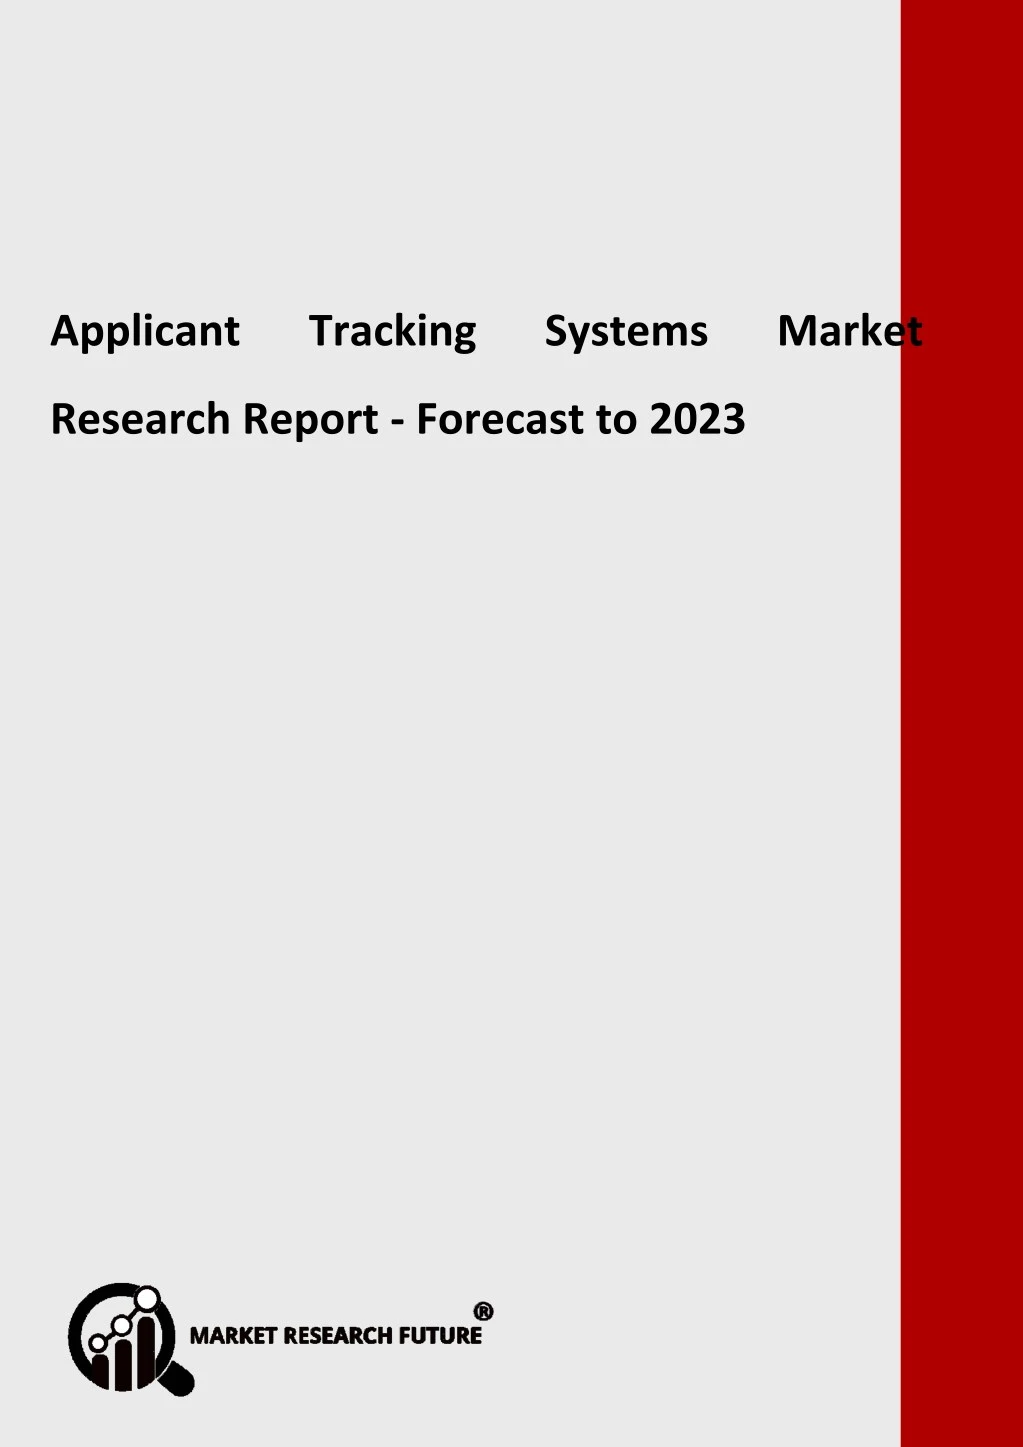 applicant tracking systems market research report